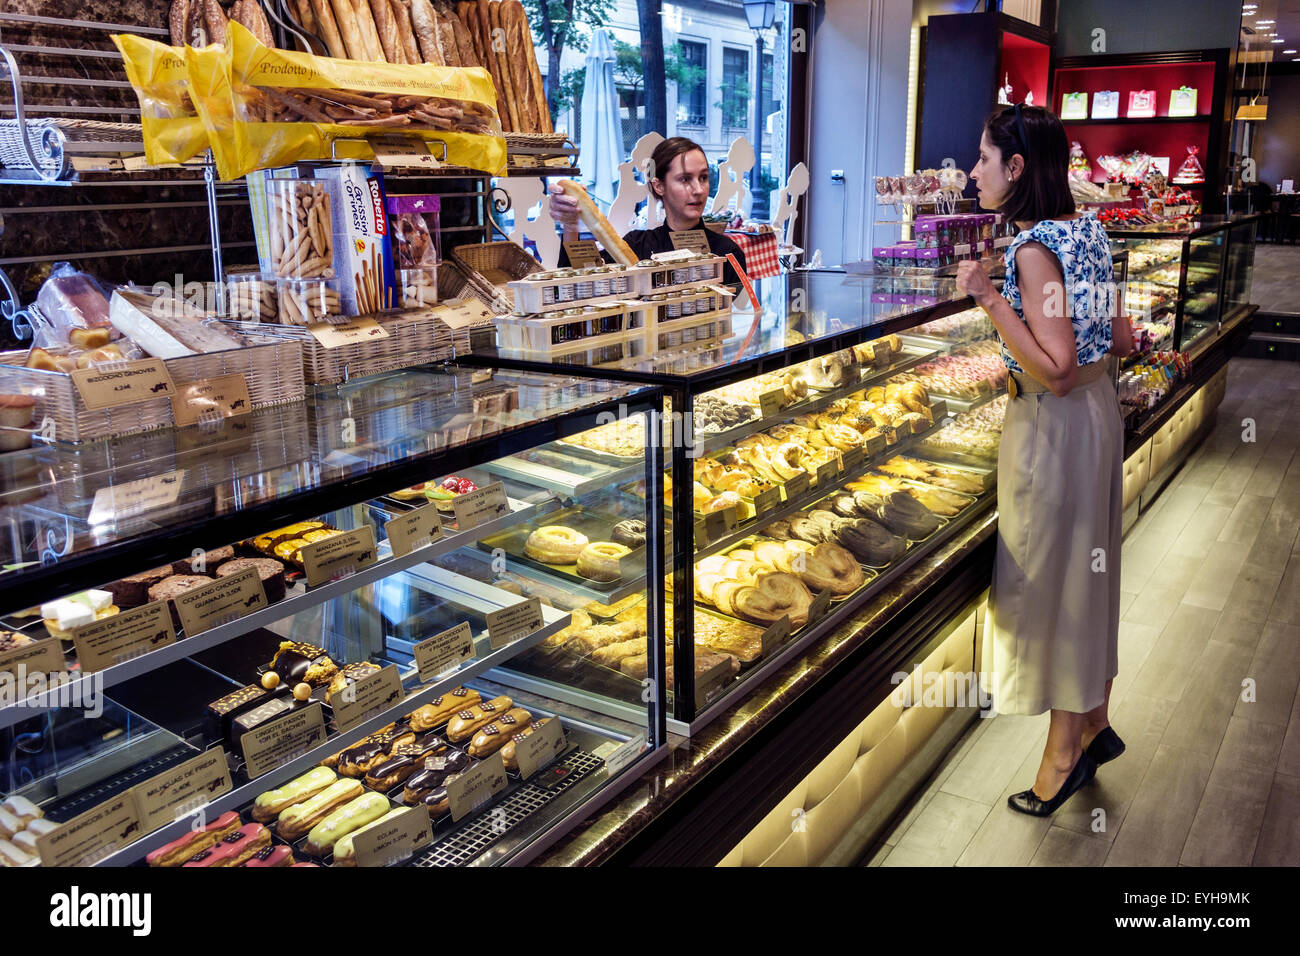 Madrid Spain,Vait,chain,bakery,cafeteria,pastry shop,display case,sweets,counter,breads,woman female women,patron,customer,standing,tiptoes,employee,j Stock Photo